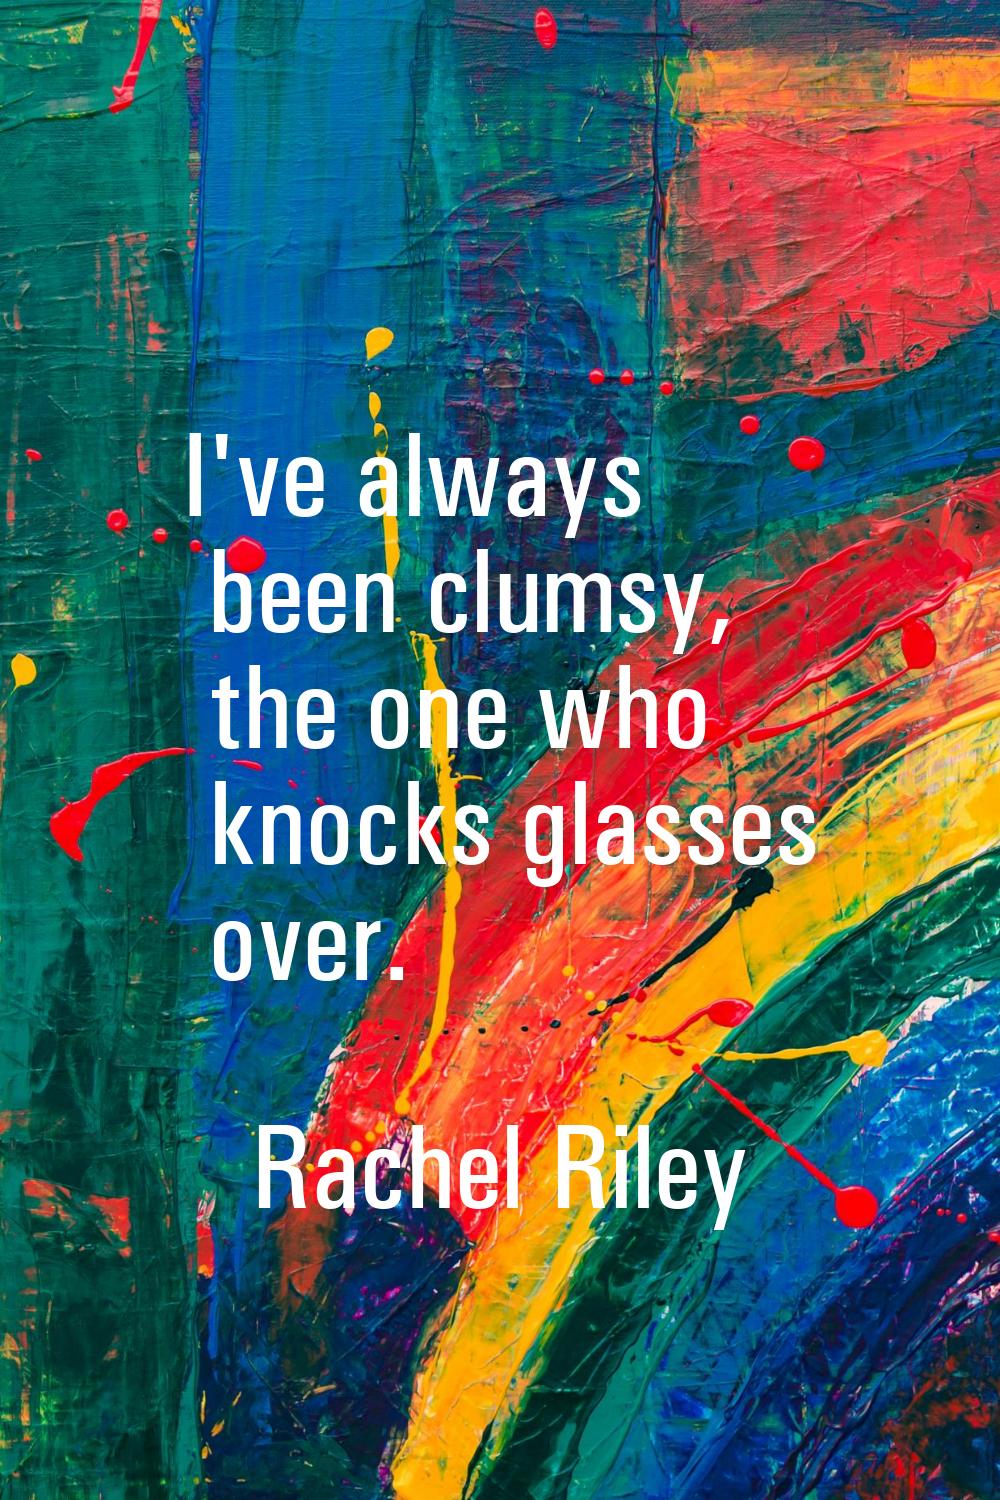 I've always been clumsy, the one who knocks glasses over.